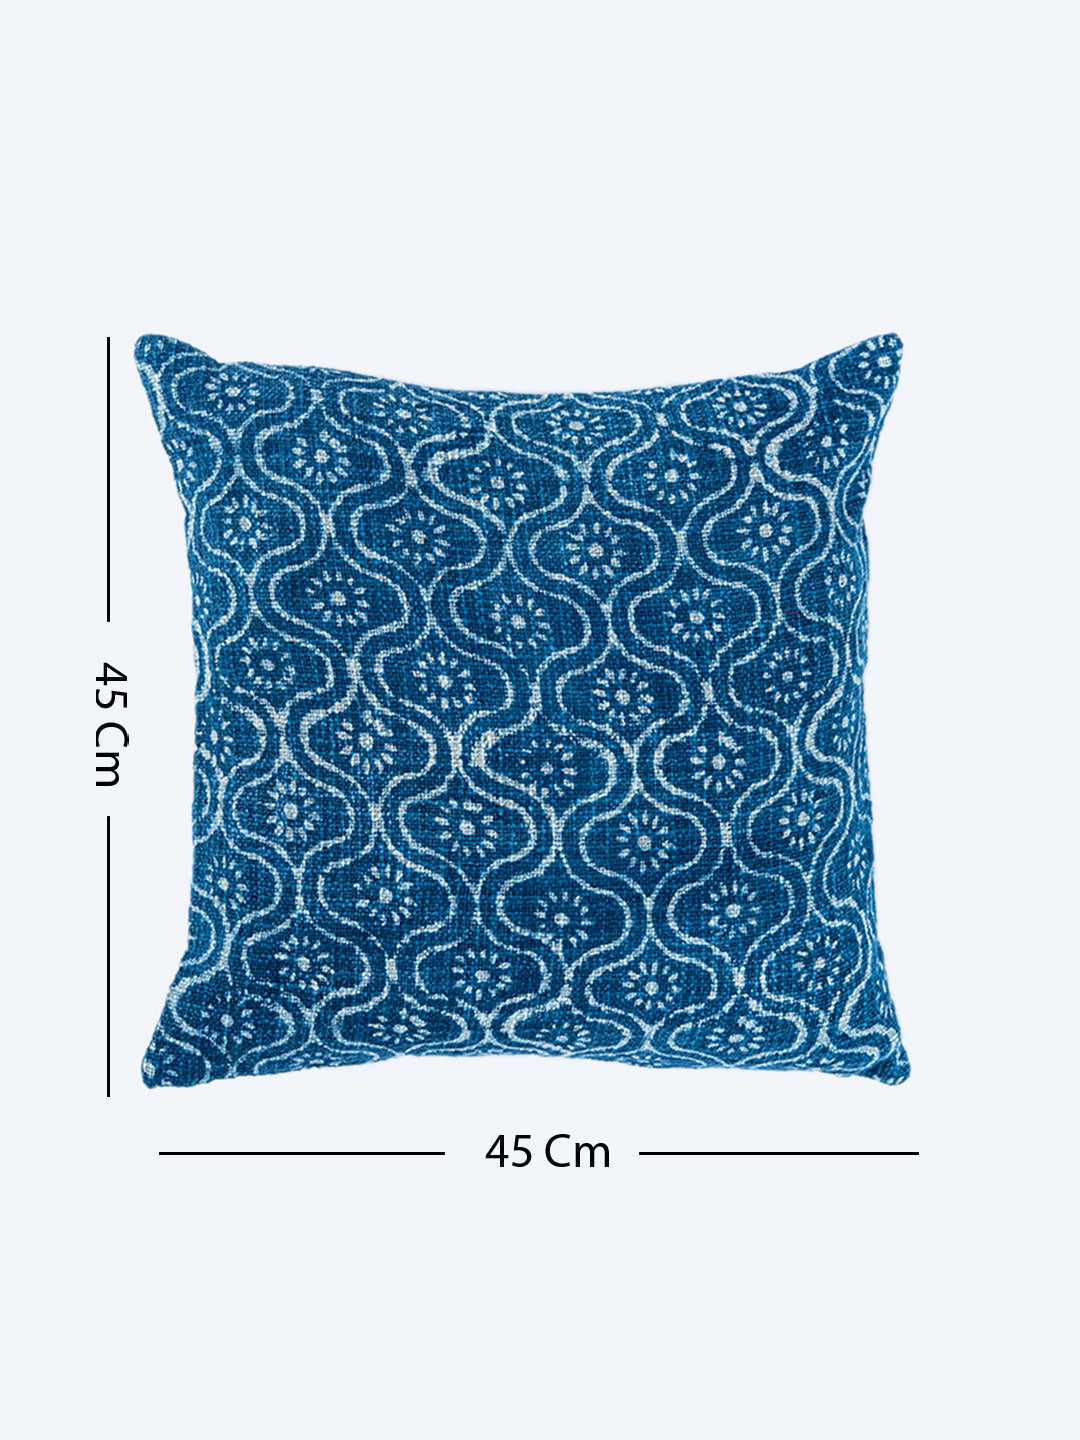 cushion covers 18x18 inches